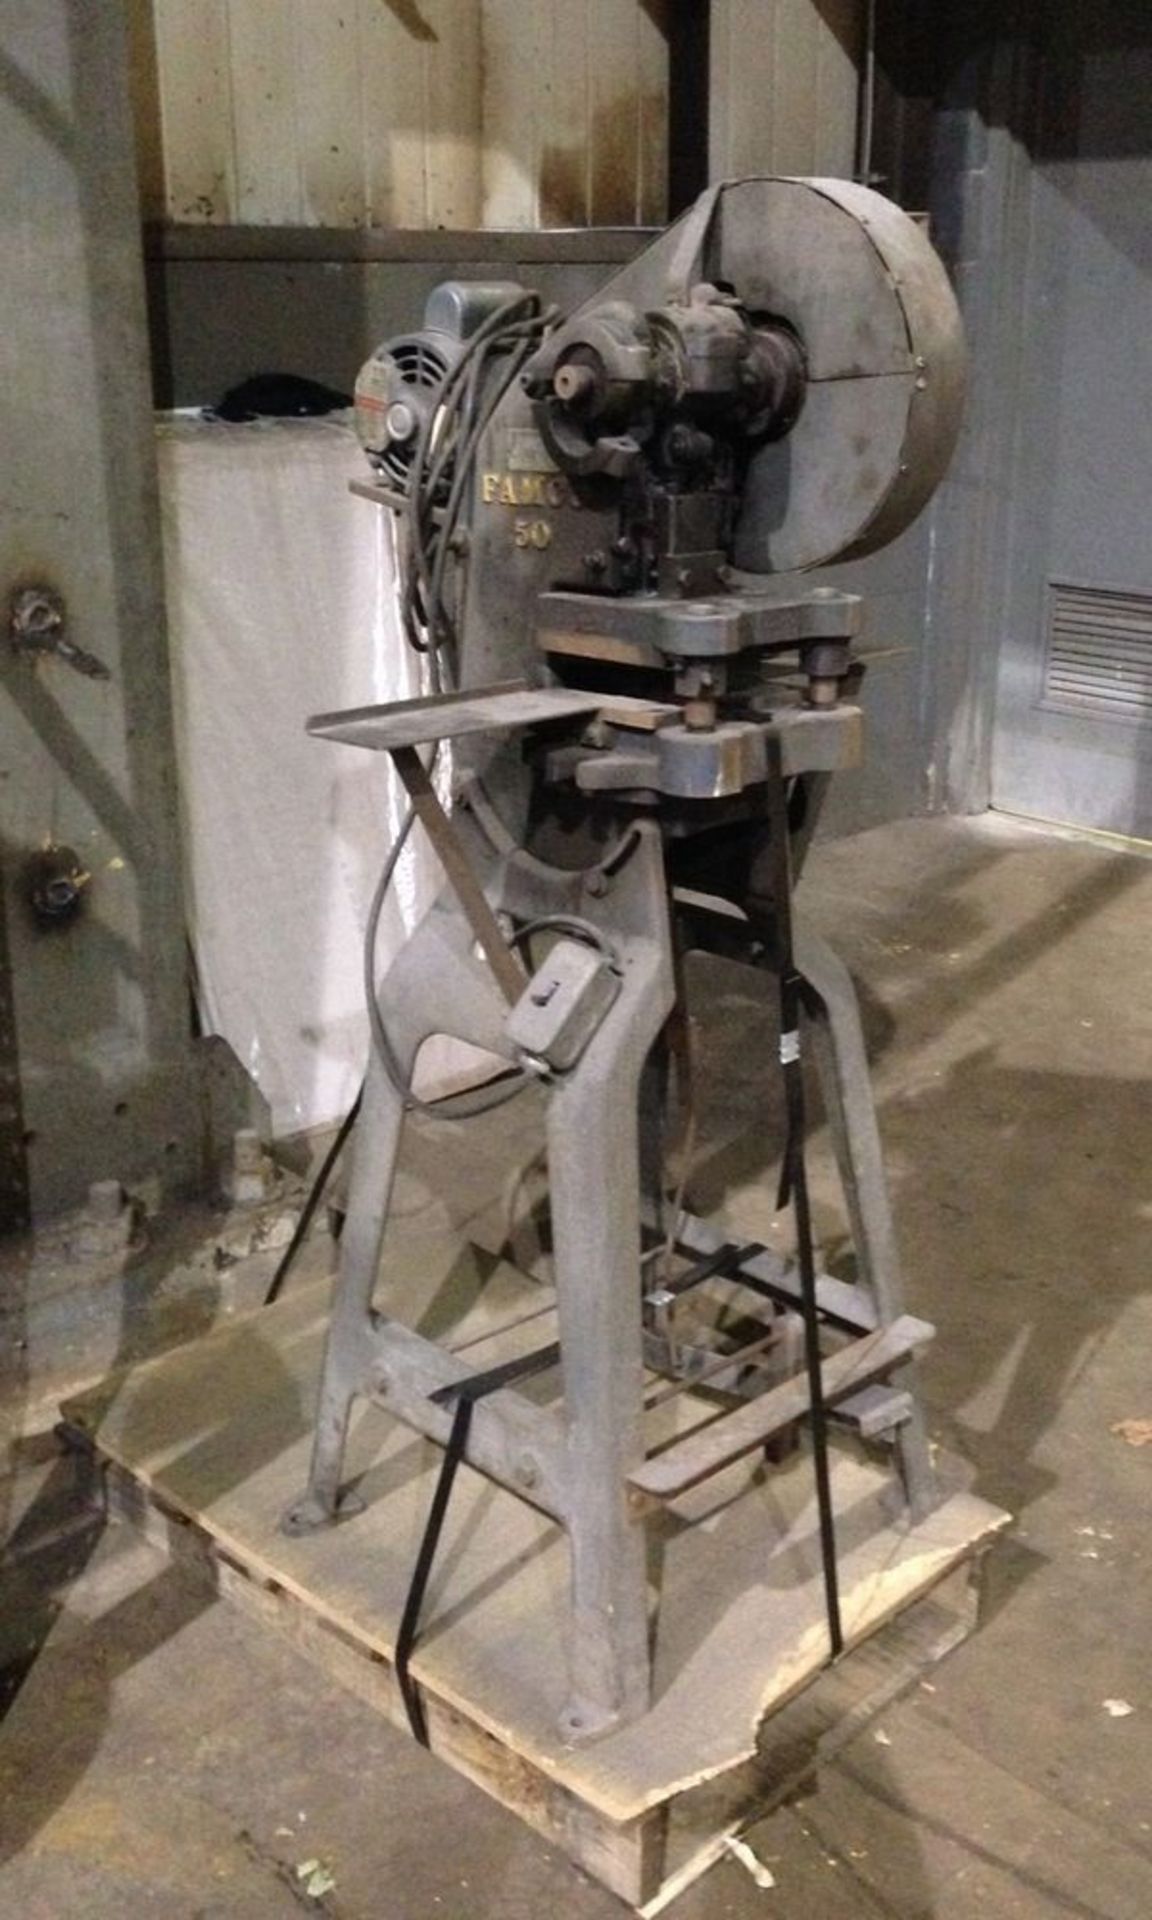 Famco OBI Punch Press 6 Ton x 10'' x 6''. LOADING FEE FOR THIS LOT: $100